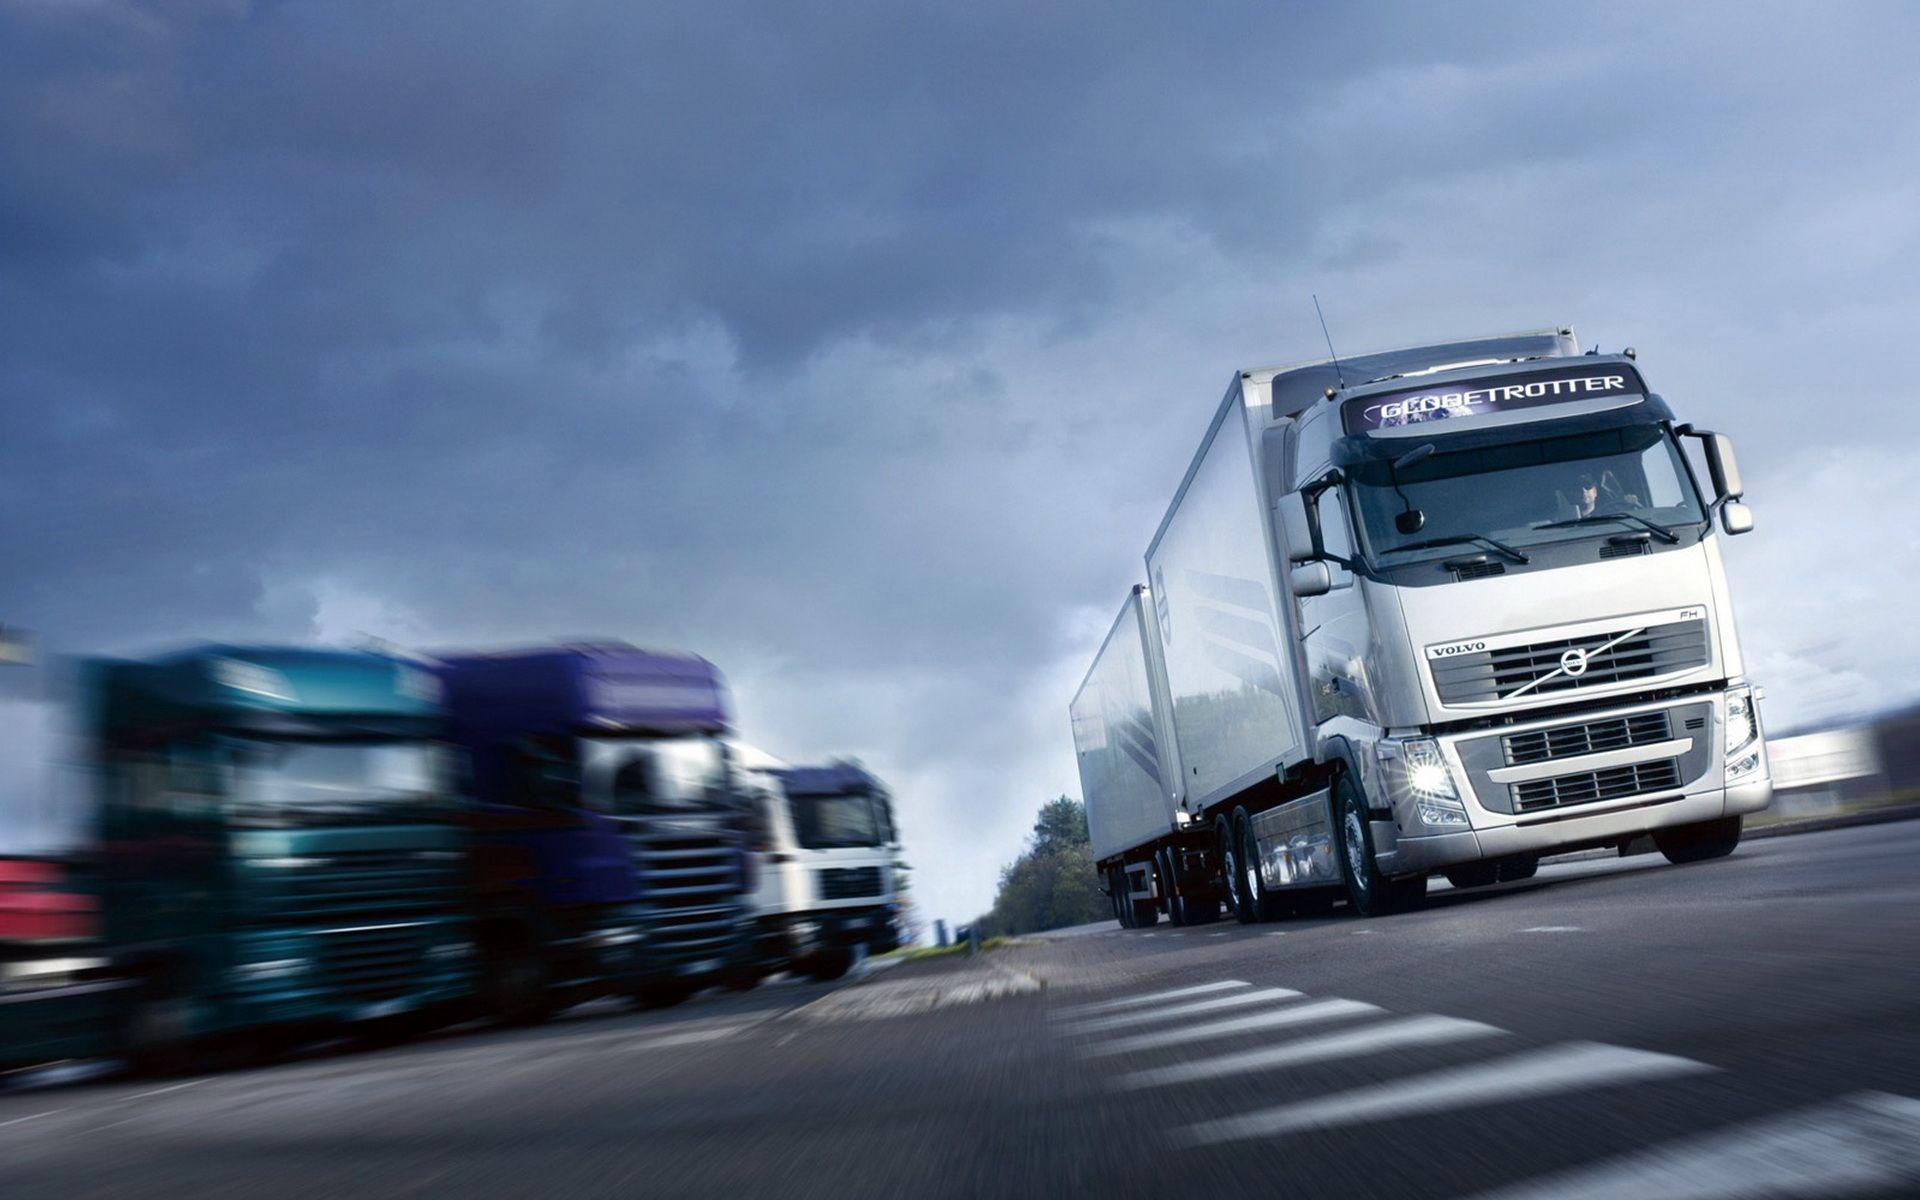 Volvo Fh 580 6x2 wallpaper and image, picture, photo